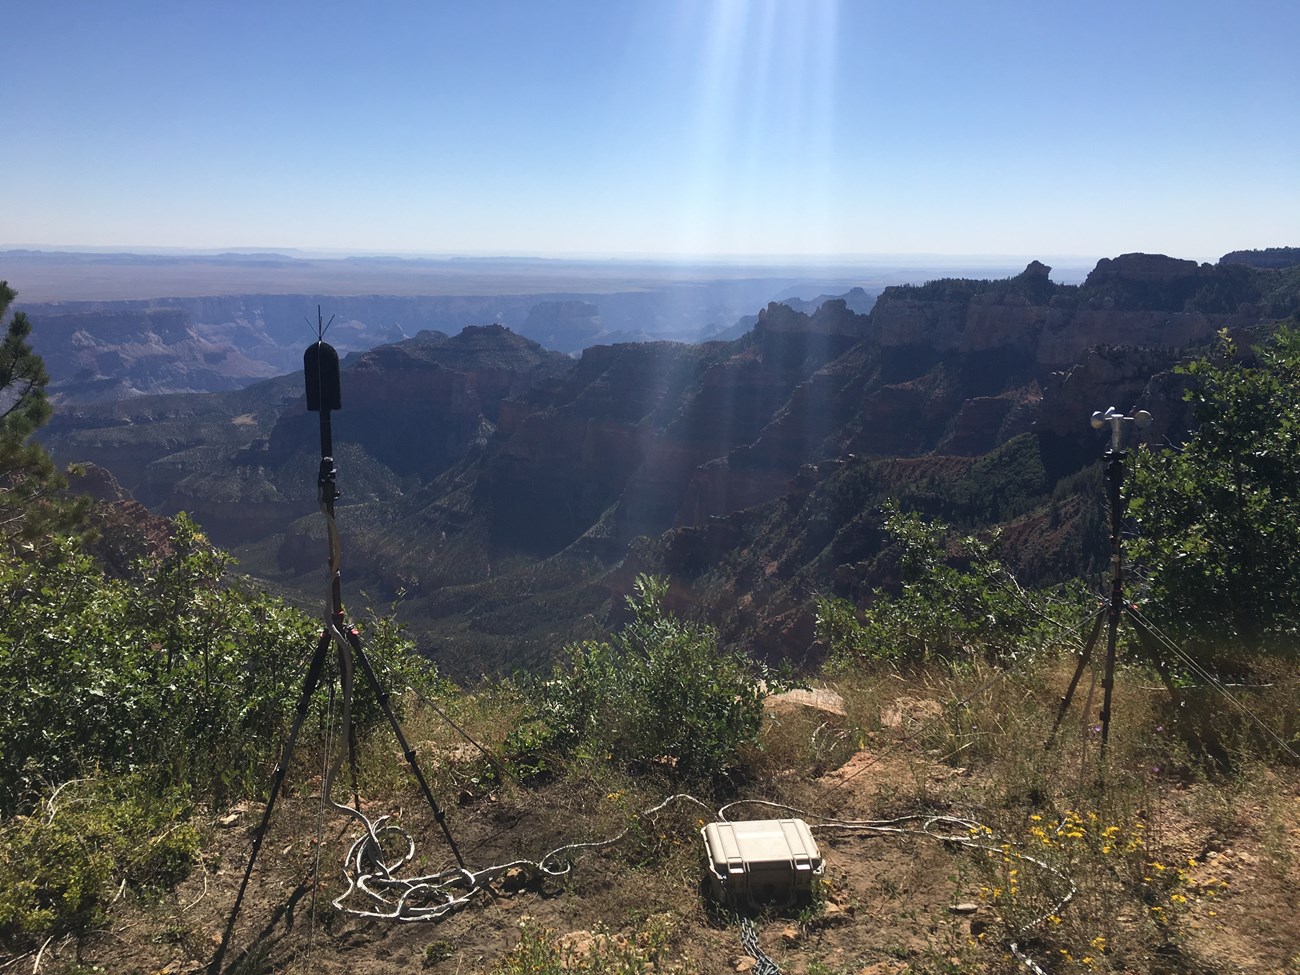 Acoustic monitoring equipment set up as tripods with wires attached are set up at the edge of the canyon.